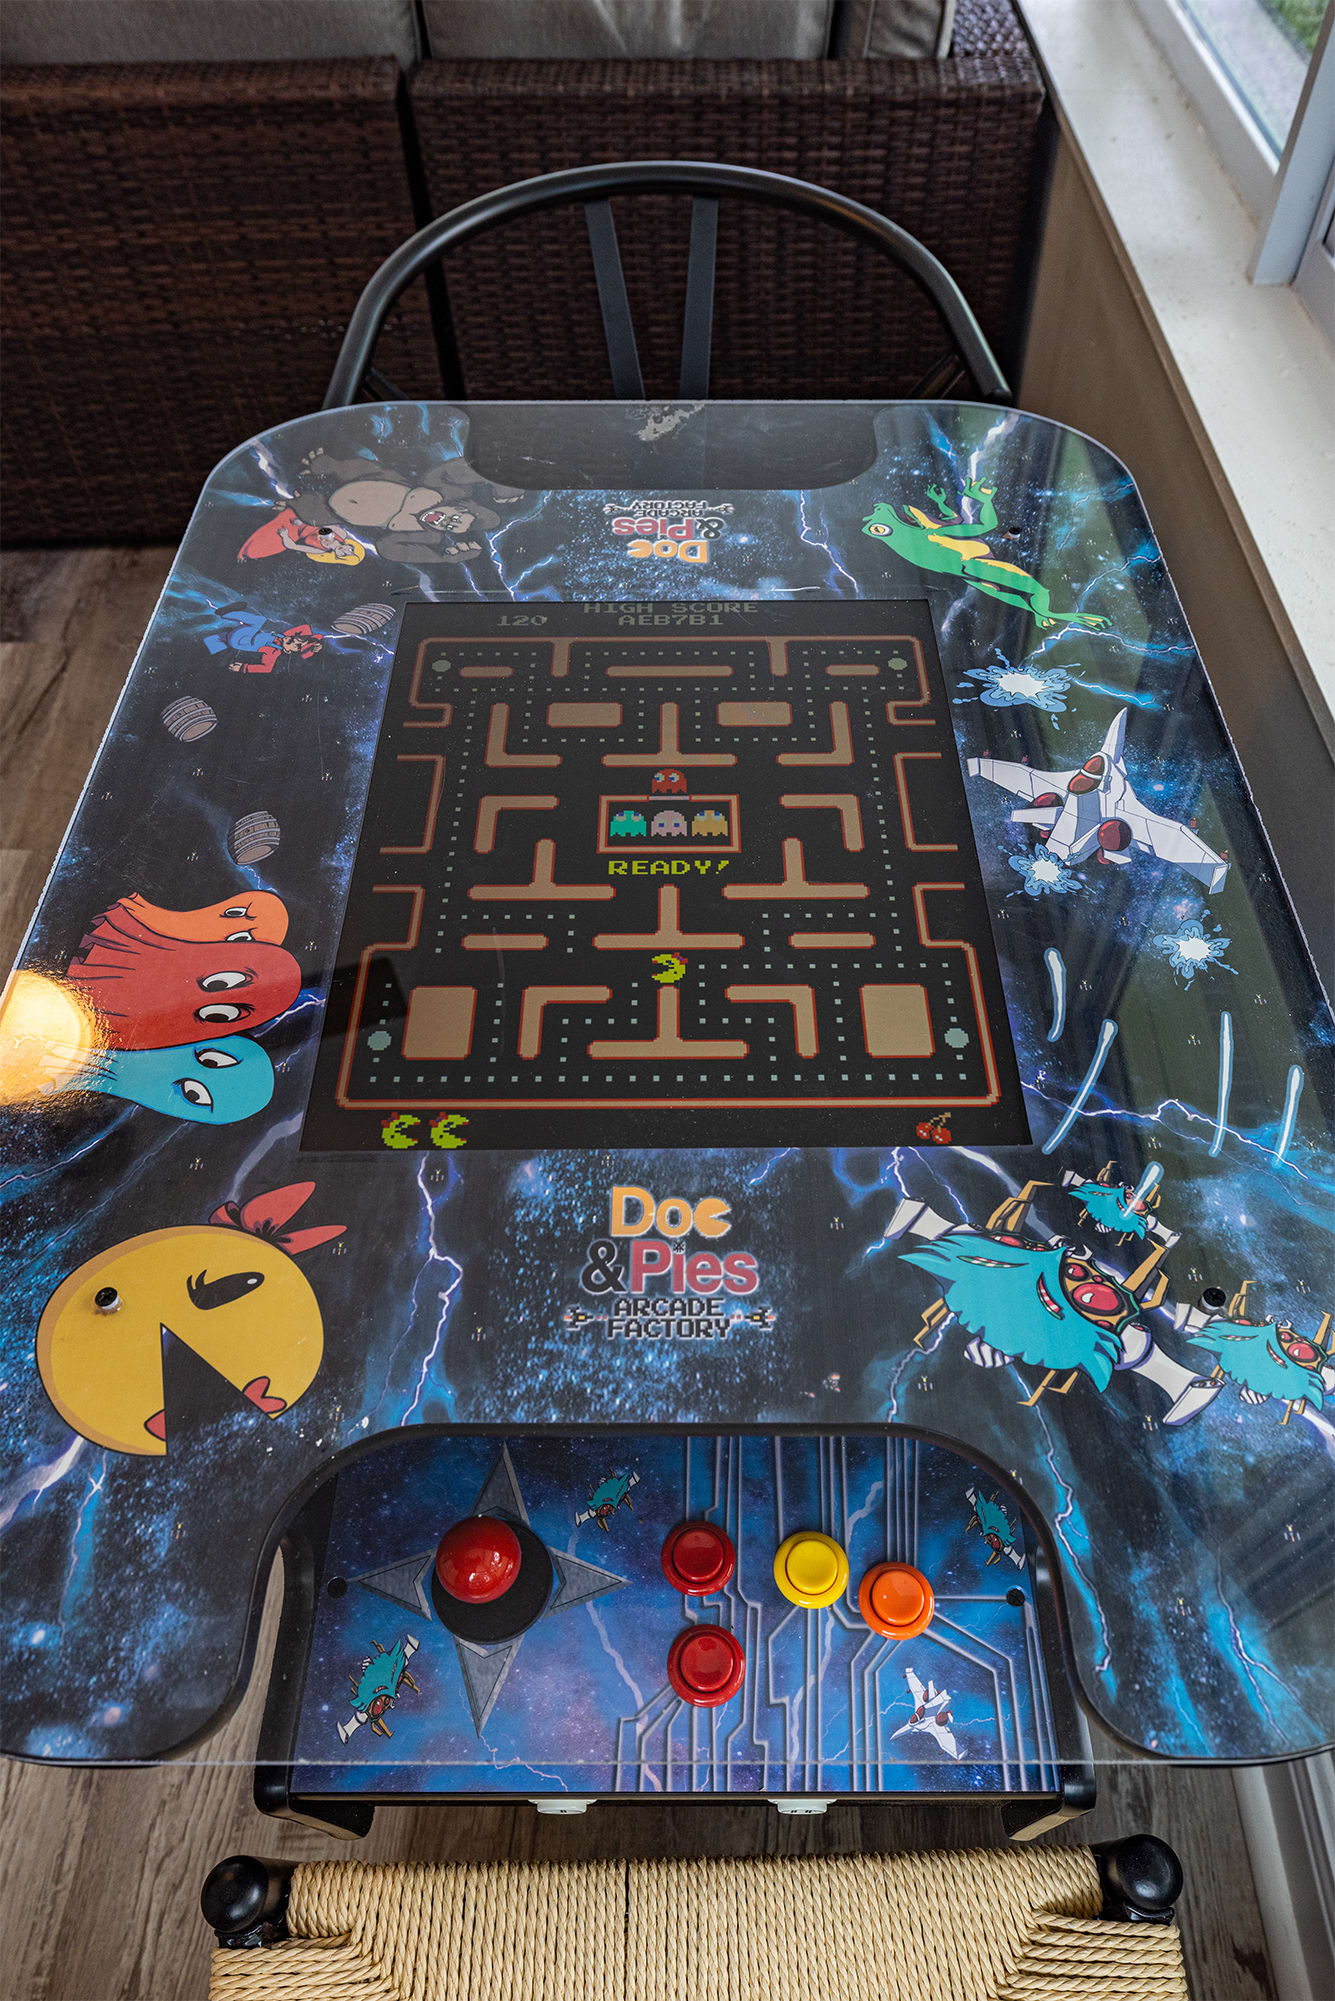 Have a pacman competition during your stay! Who can reach the highest score?